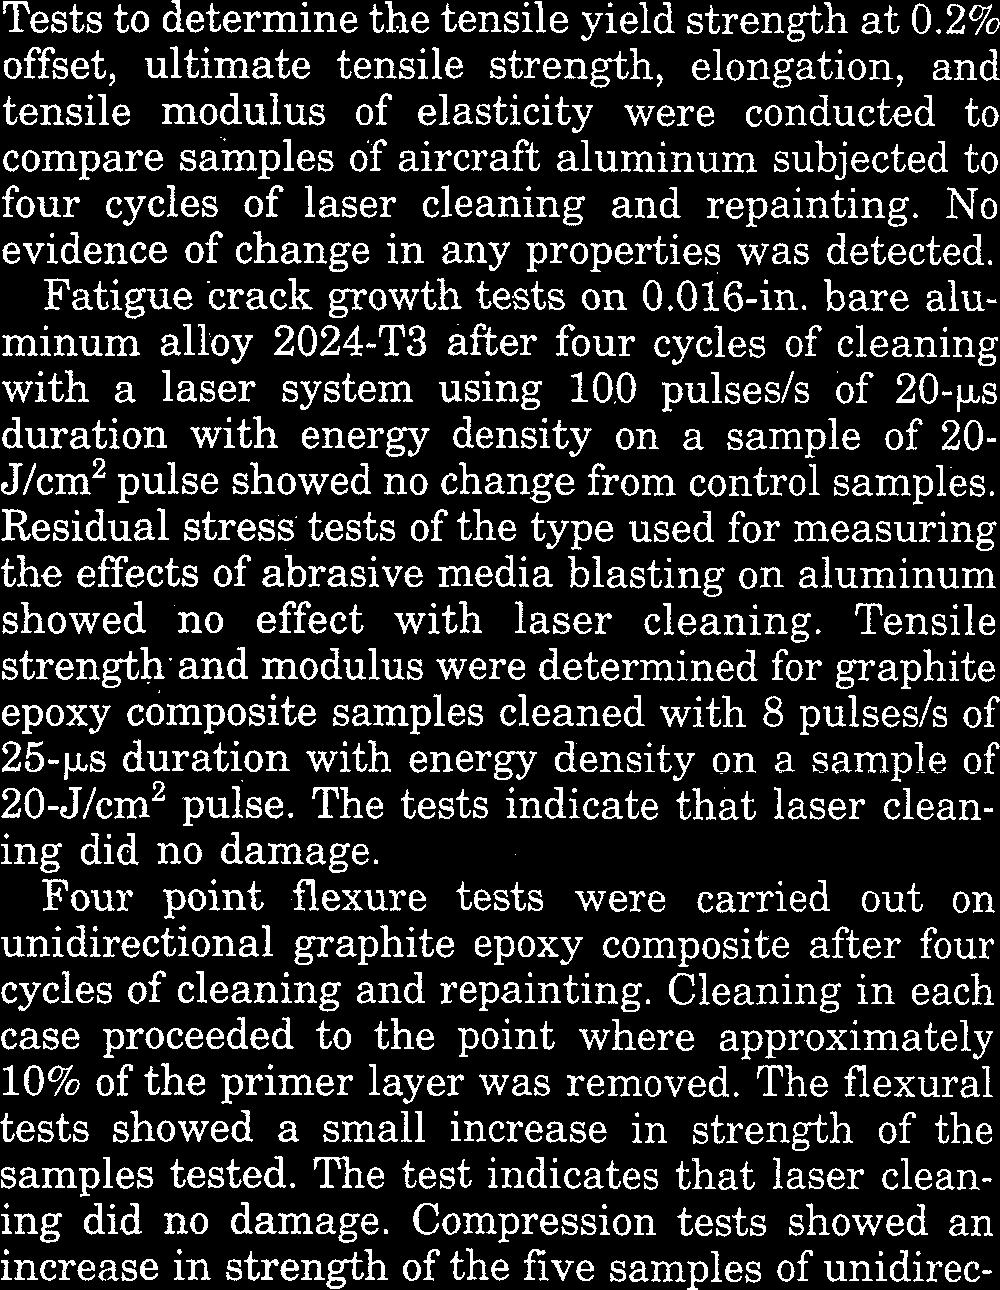 More failures were observed in control samples than in samples cleaned by laser stripping.